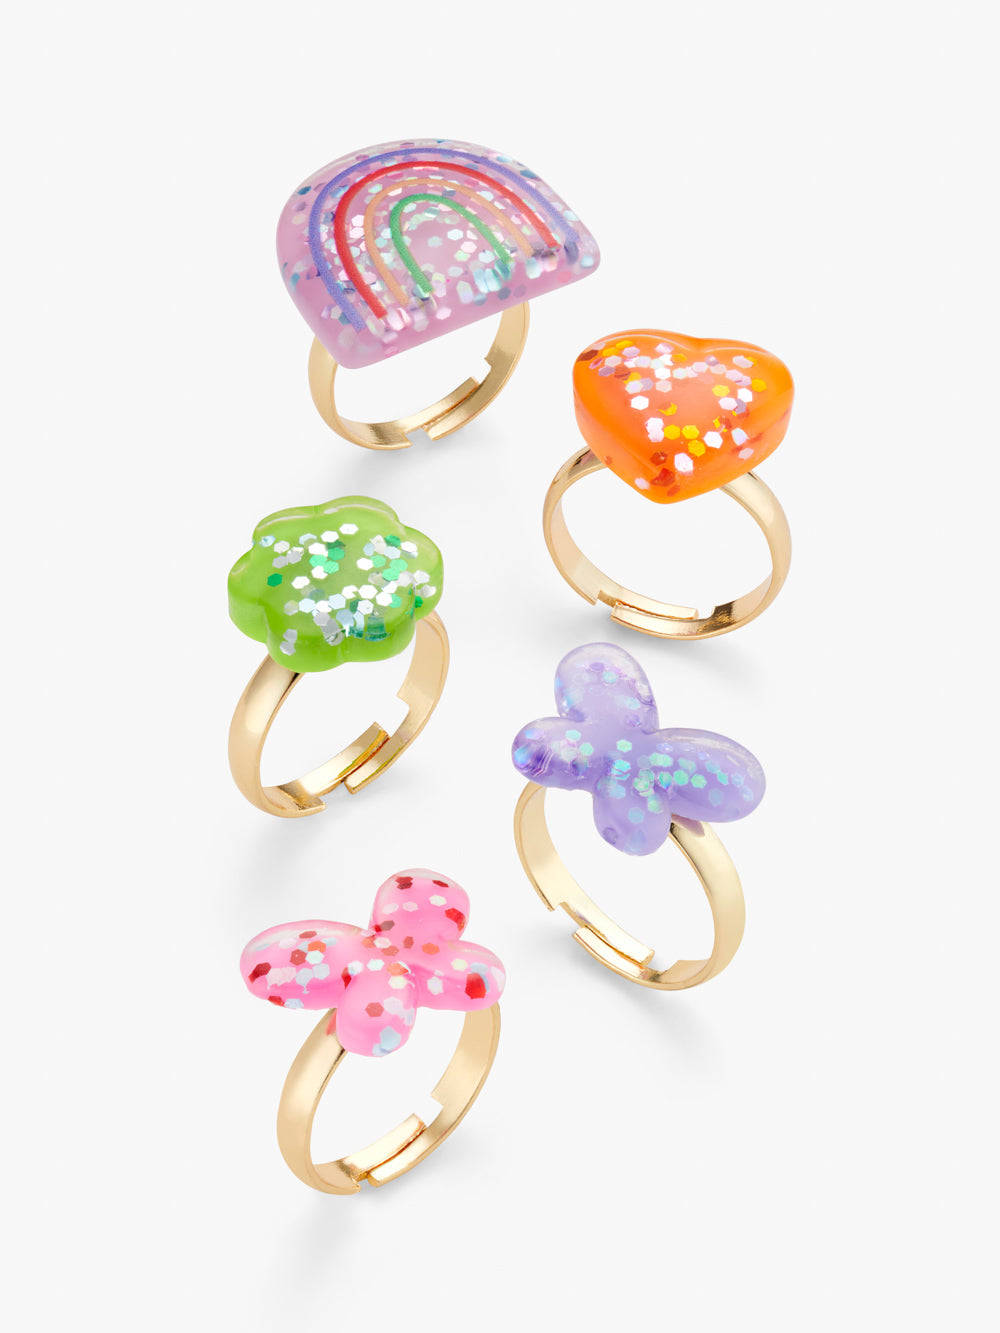 Small Stuff Accessories - Glitter ring set with butterflies, flower, heart and a rainbow in an array of colours.